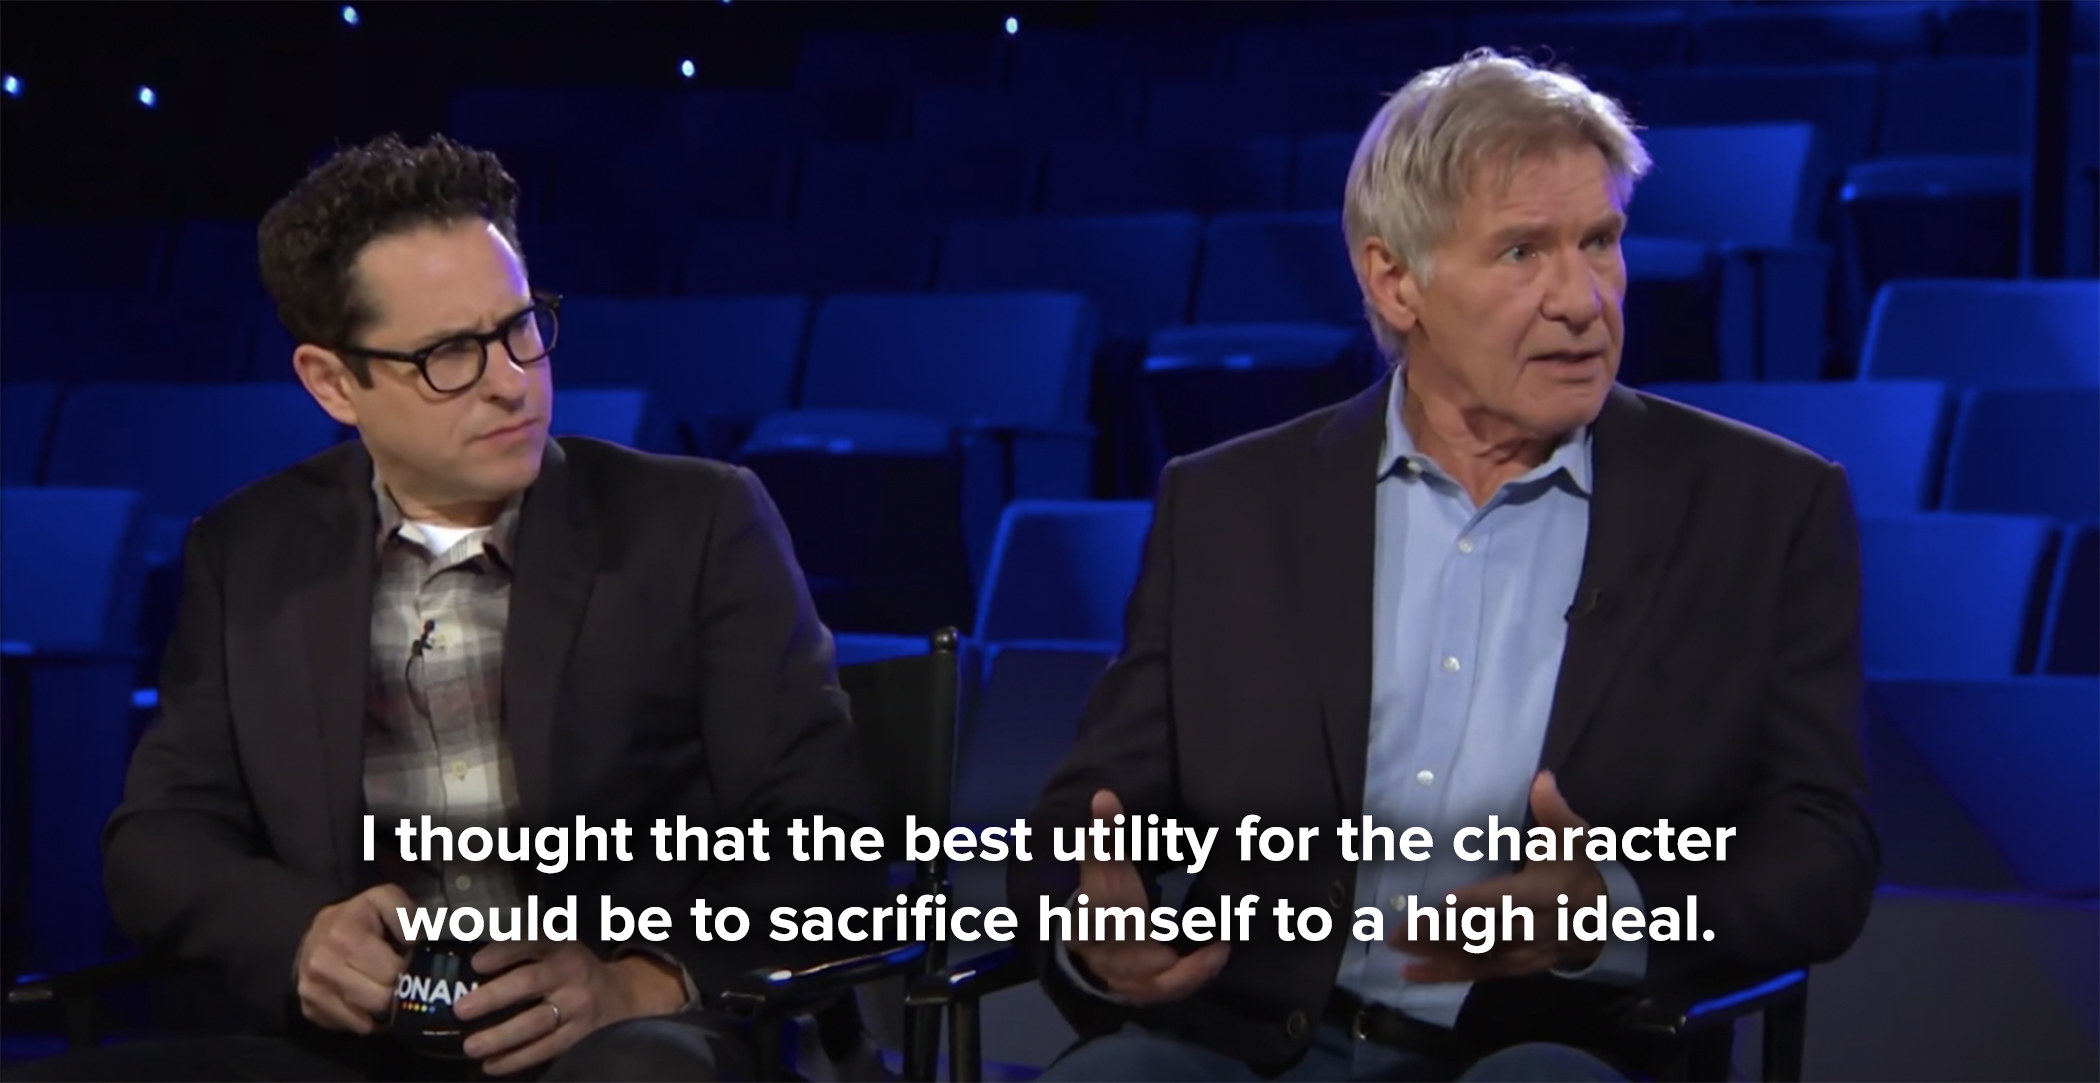 Harrison Ford saying &quot;I thought that the best utility for the character would be to sacrifice himself to a high ideal&quot;